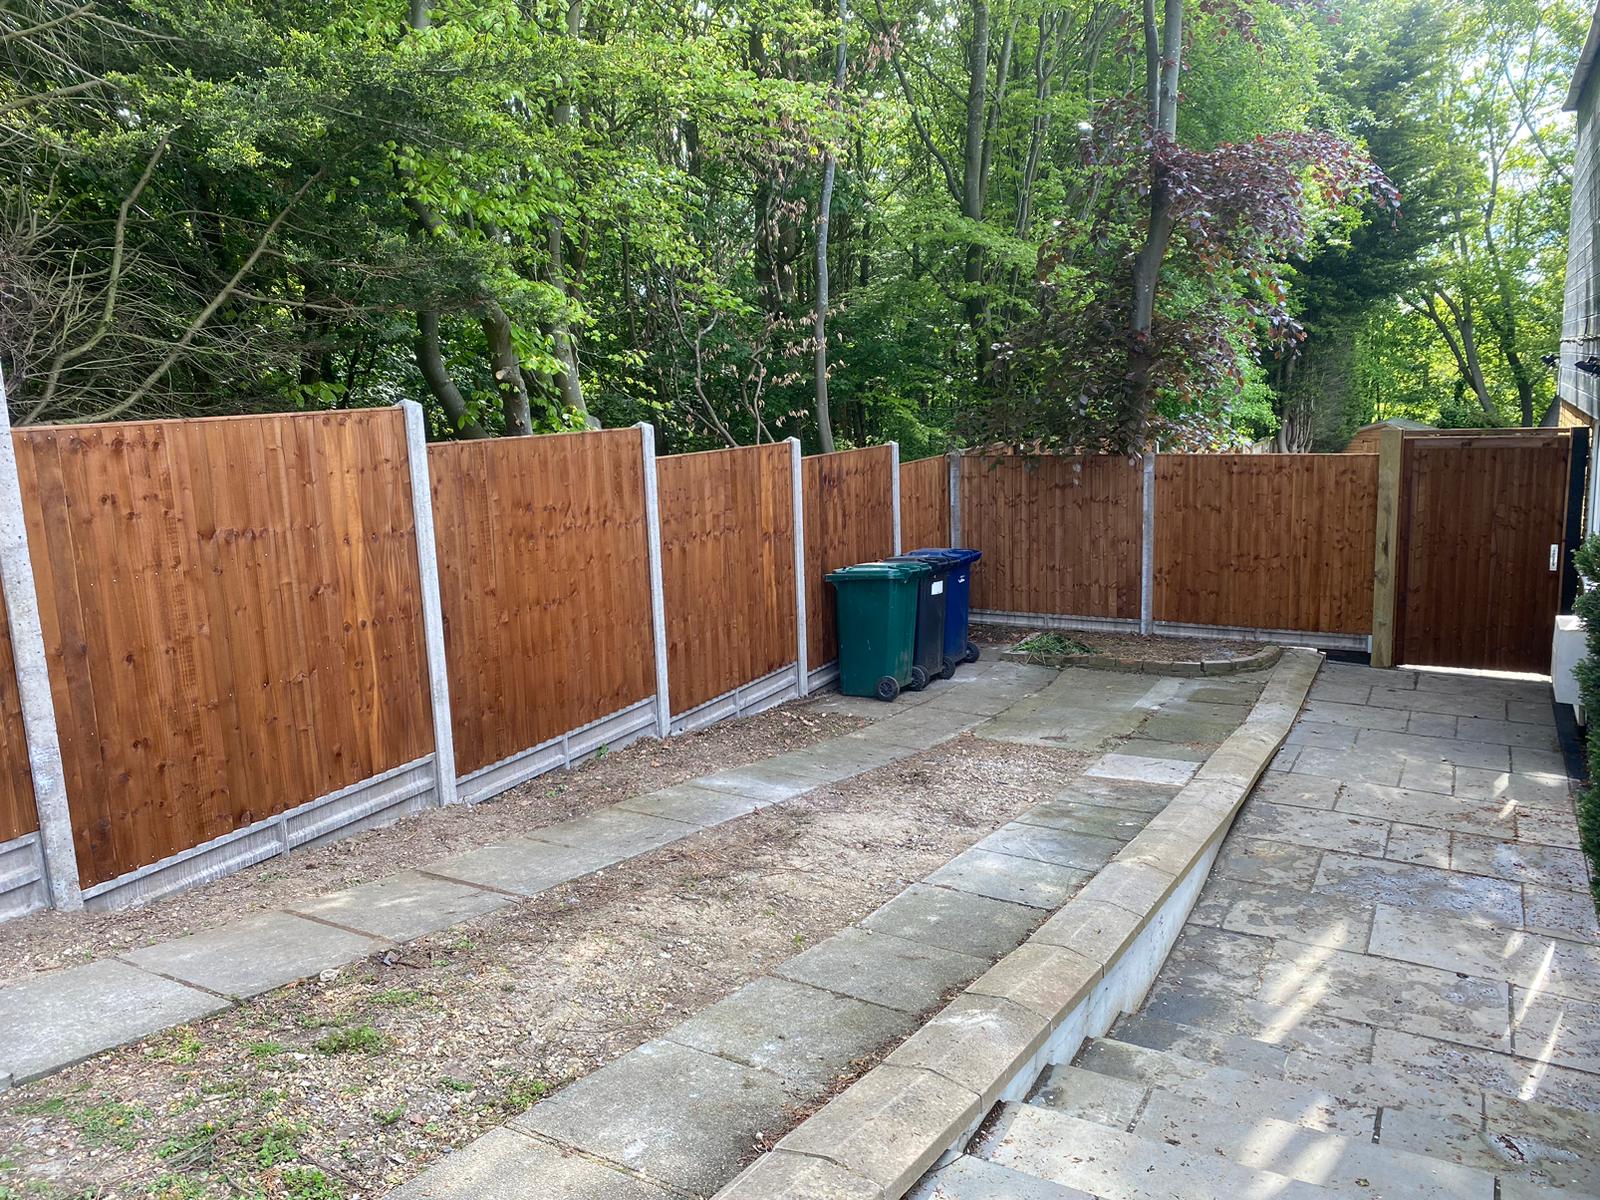 An image showing 6 new fence panels installed to back garden with concrete posts.